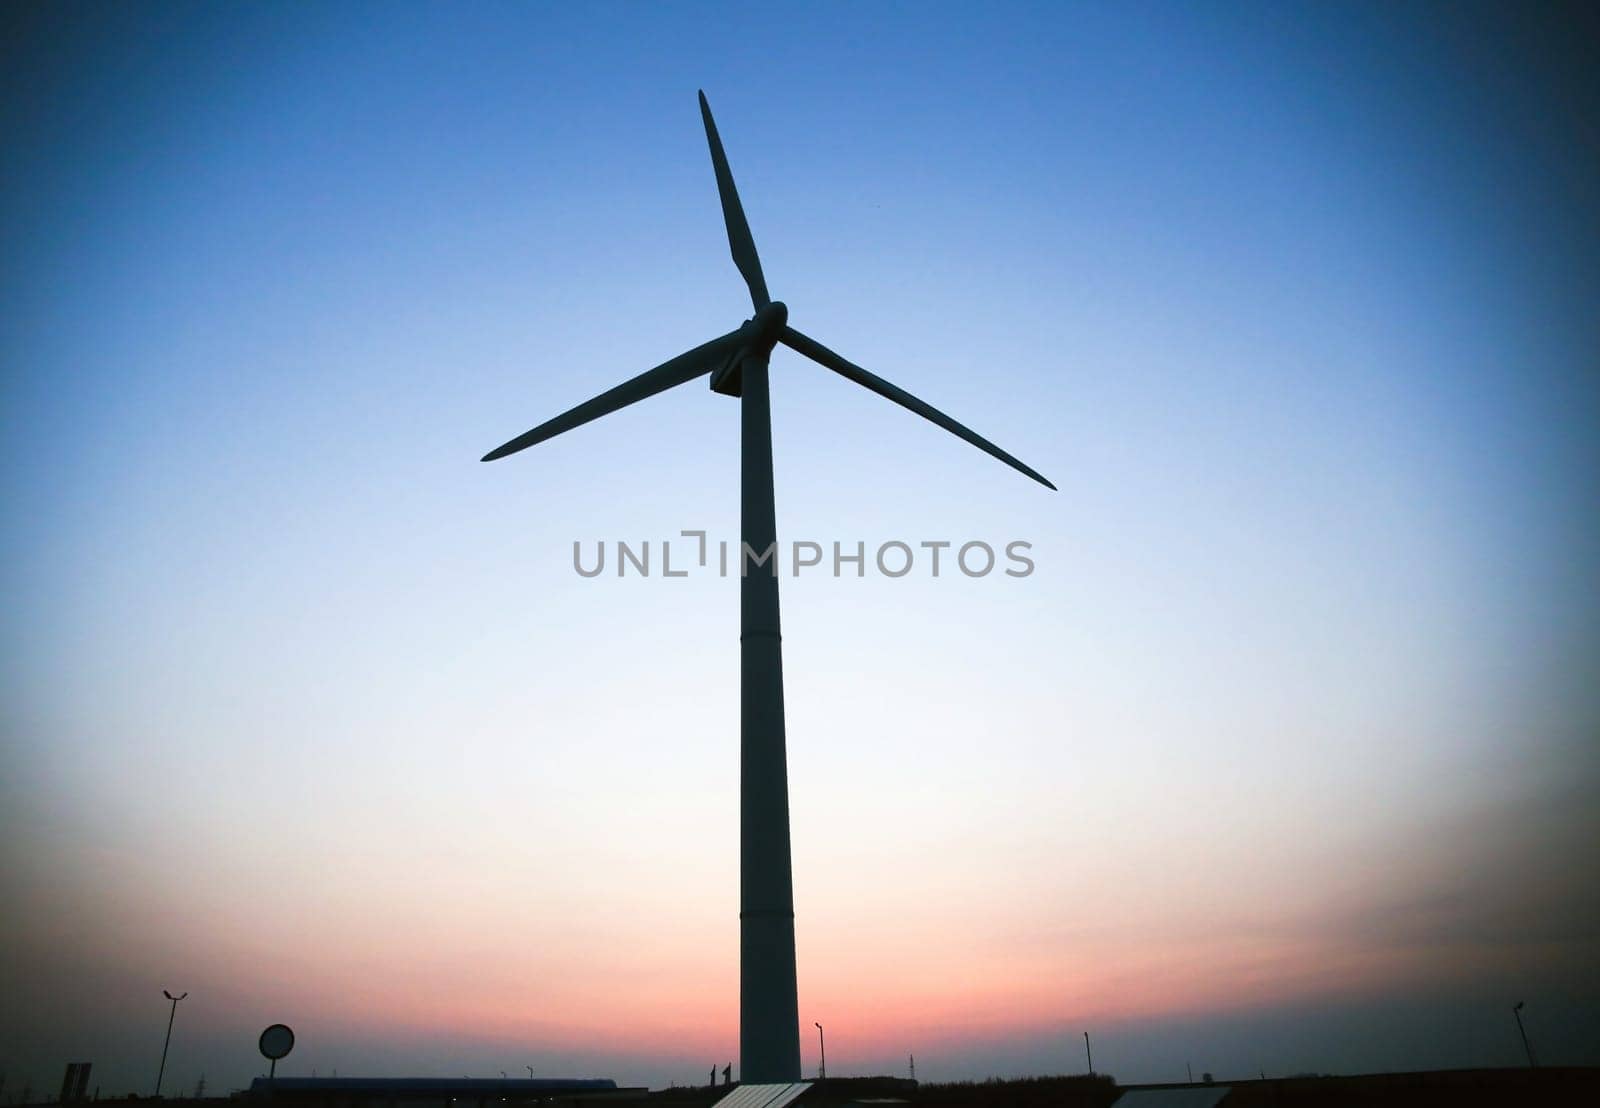 A wind turbine stands tall, its blades still against the blue sky, creating a striking silhouette on the horizon.